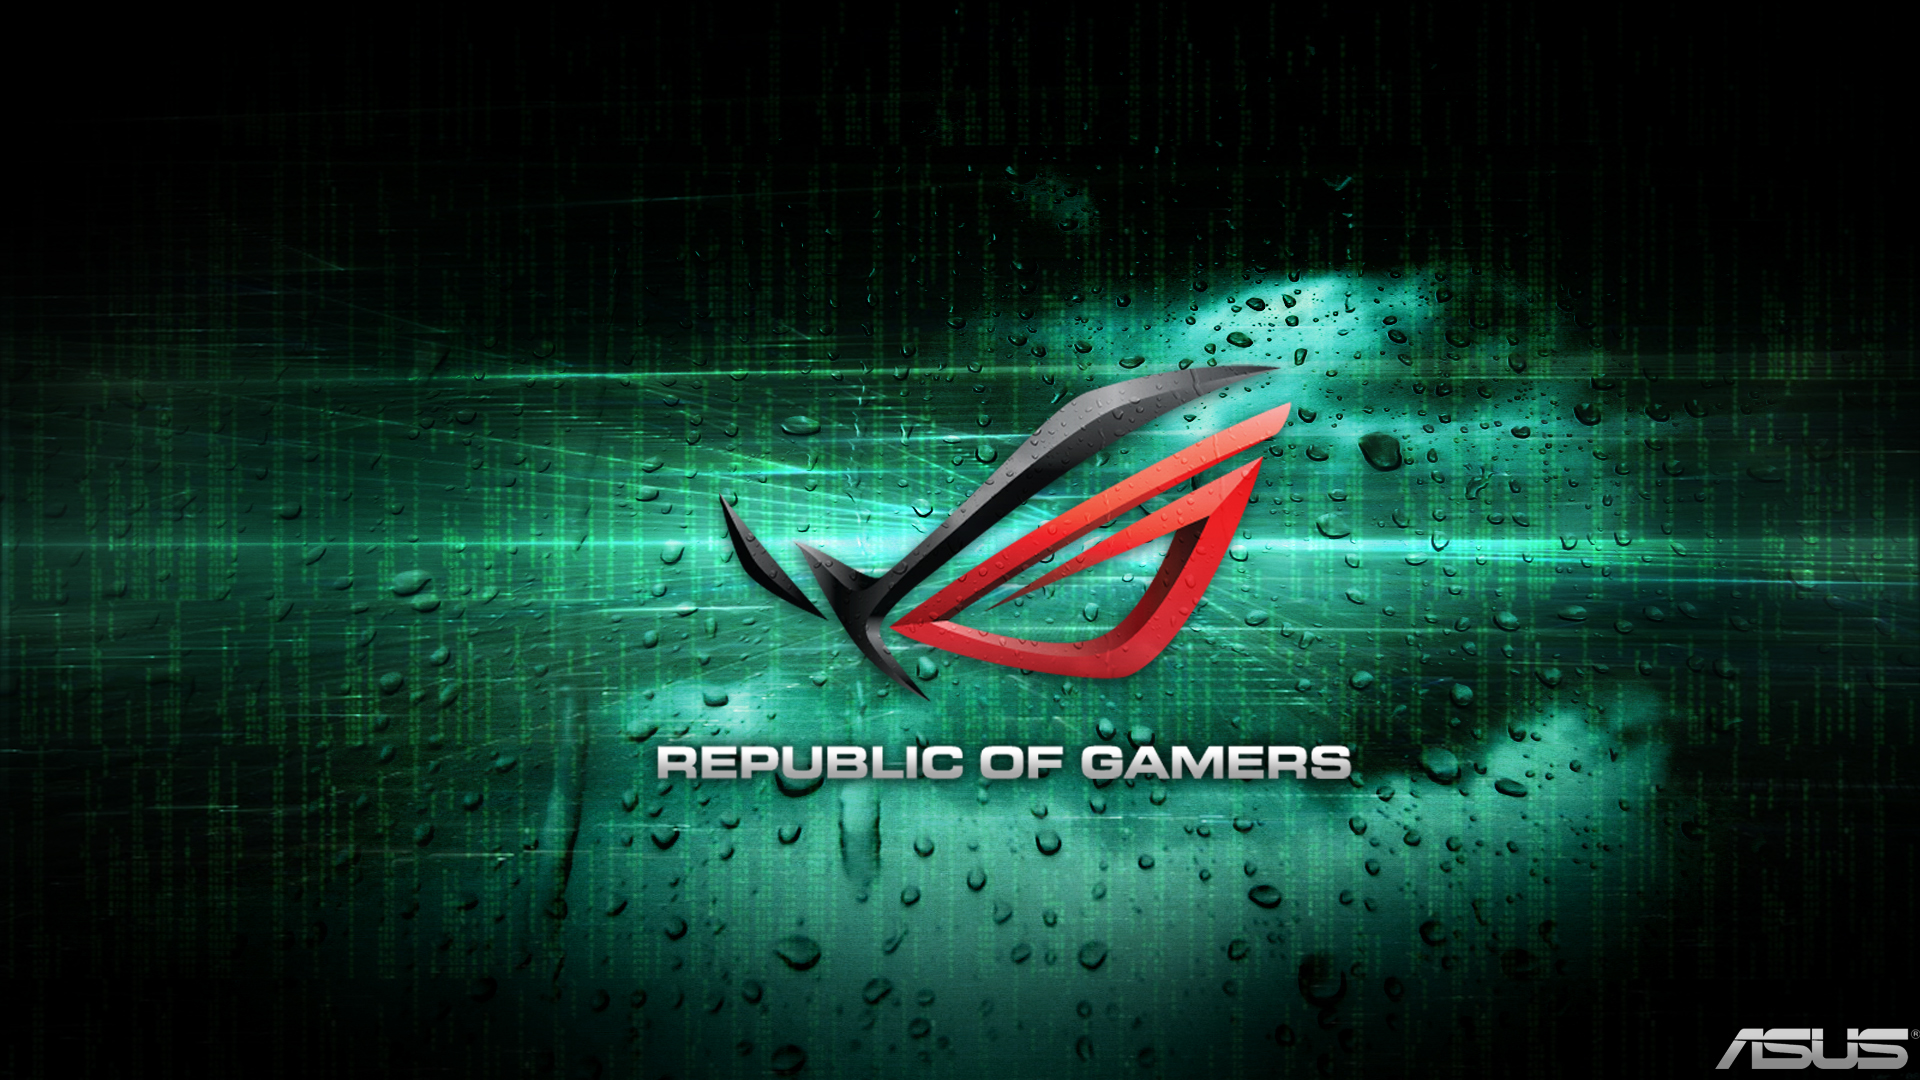 Photos asus republic of gamers wallpaper 1920x1080 page 5 1920x1080